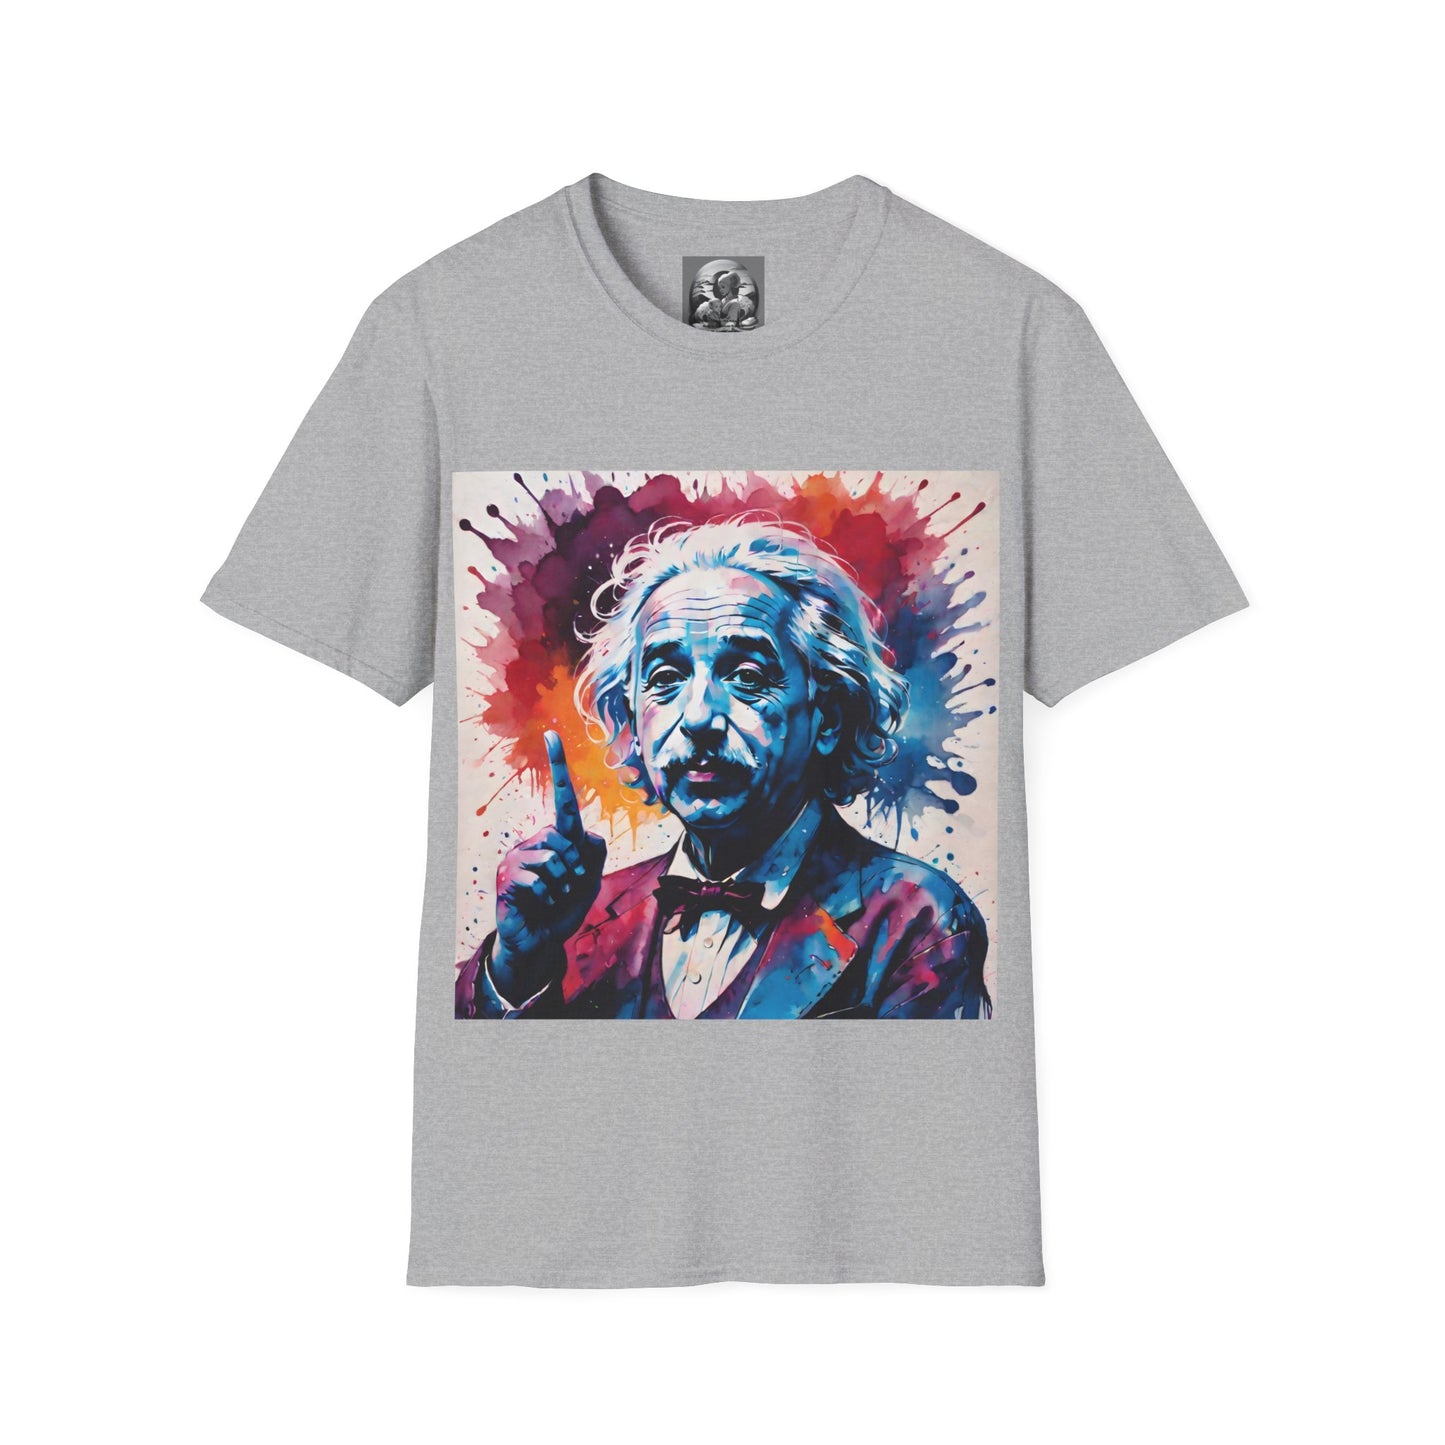 "The theory of everything" Single Print Unisex Softstyle T-Shirt